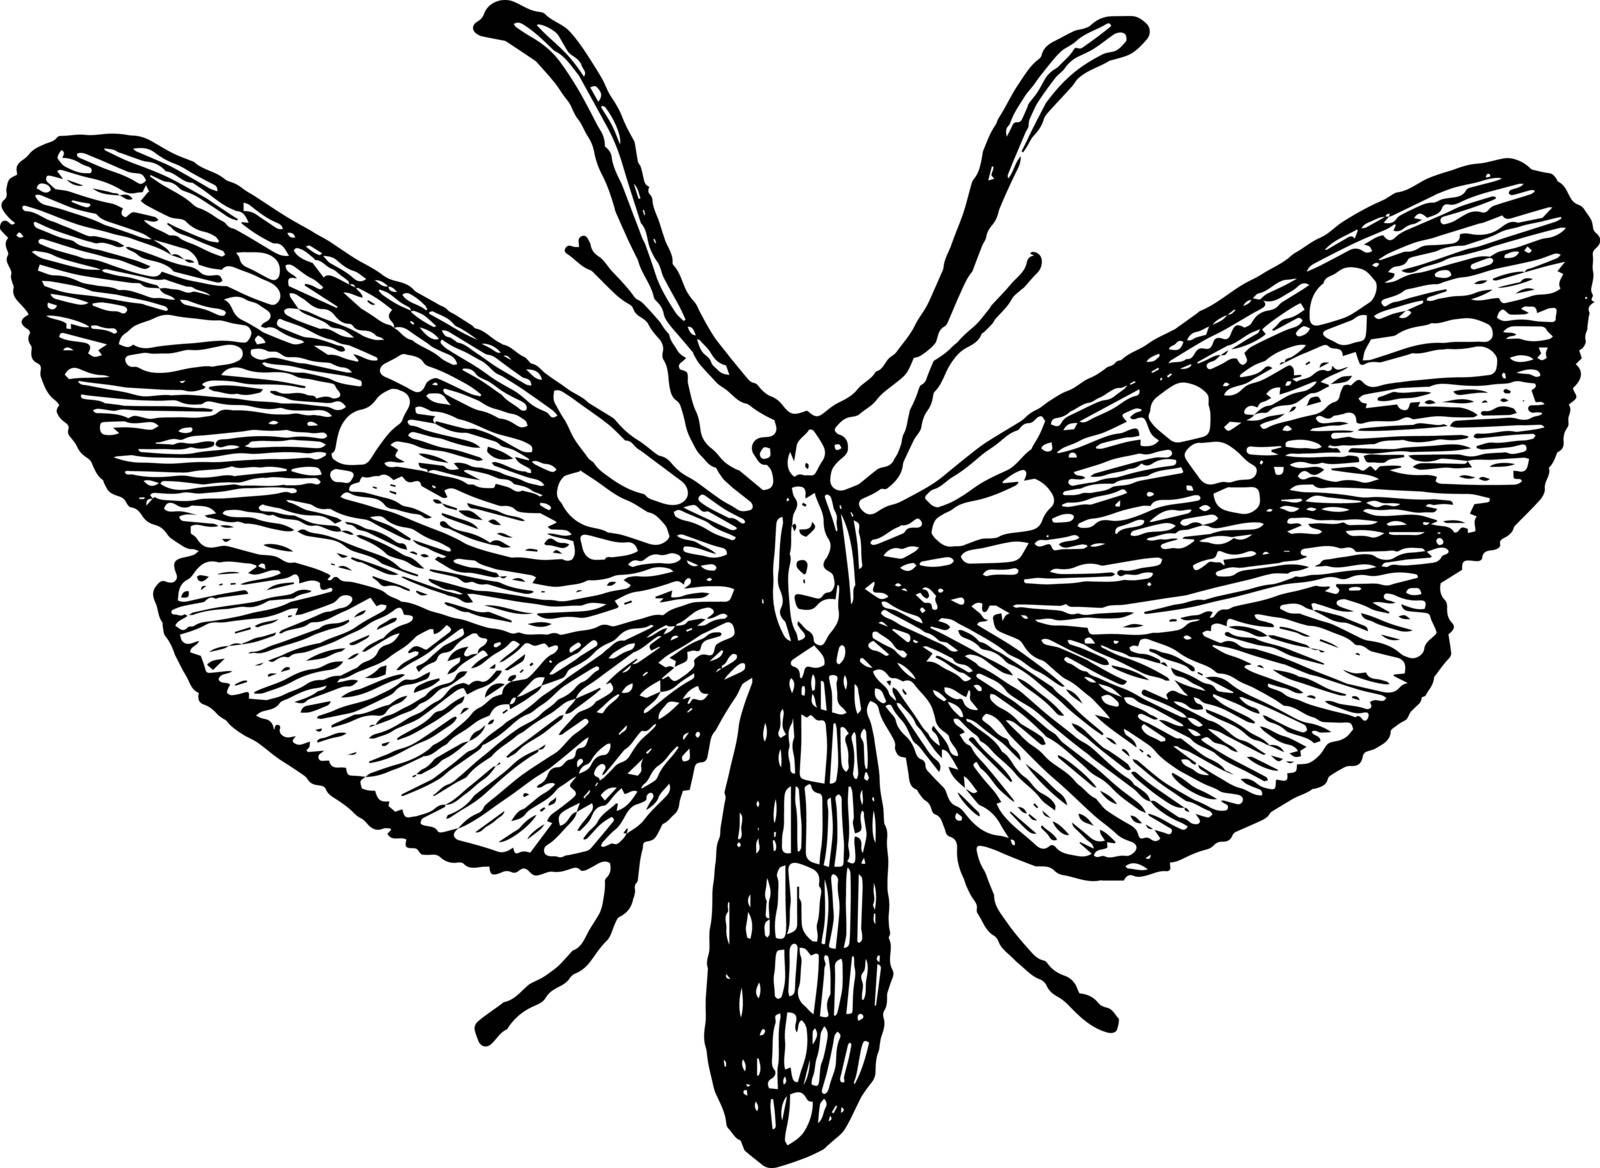 Six Spot Burnet Moth is common from June to the beginning of August vintage line drawing or engraving illustration.